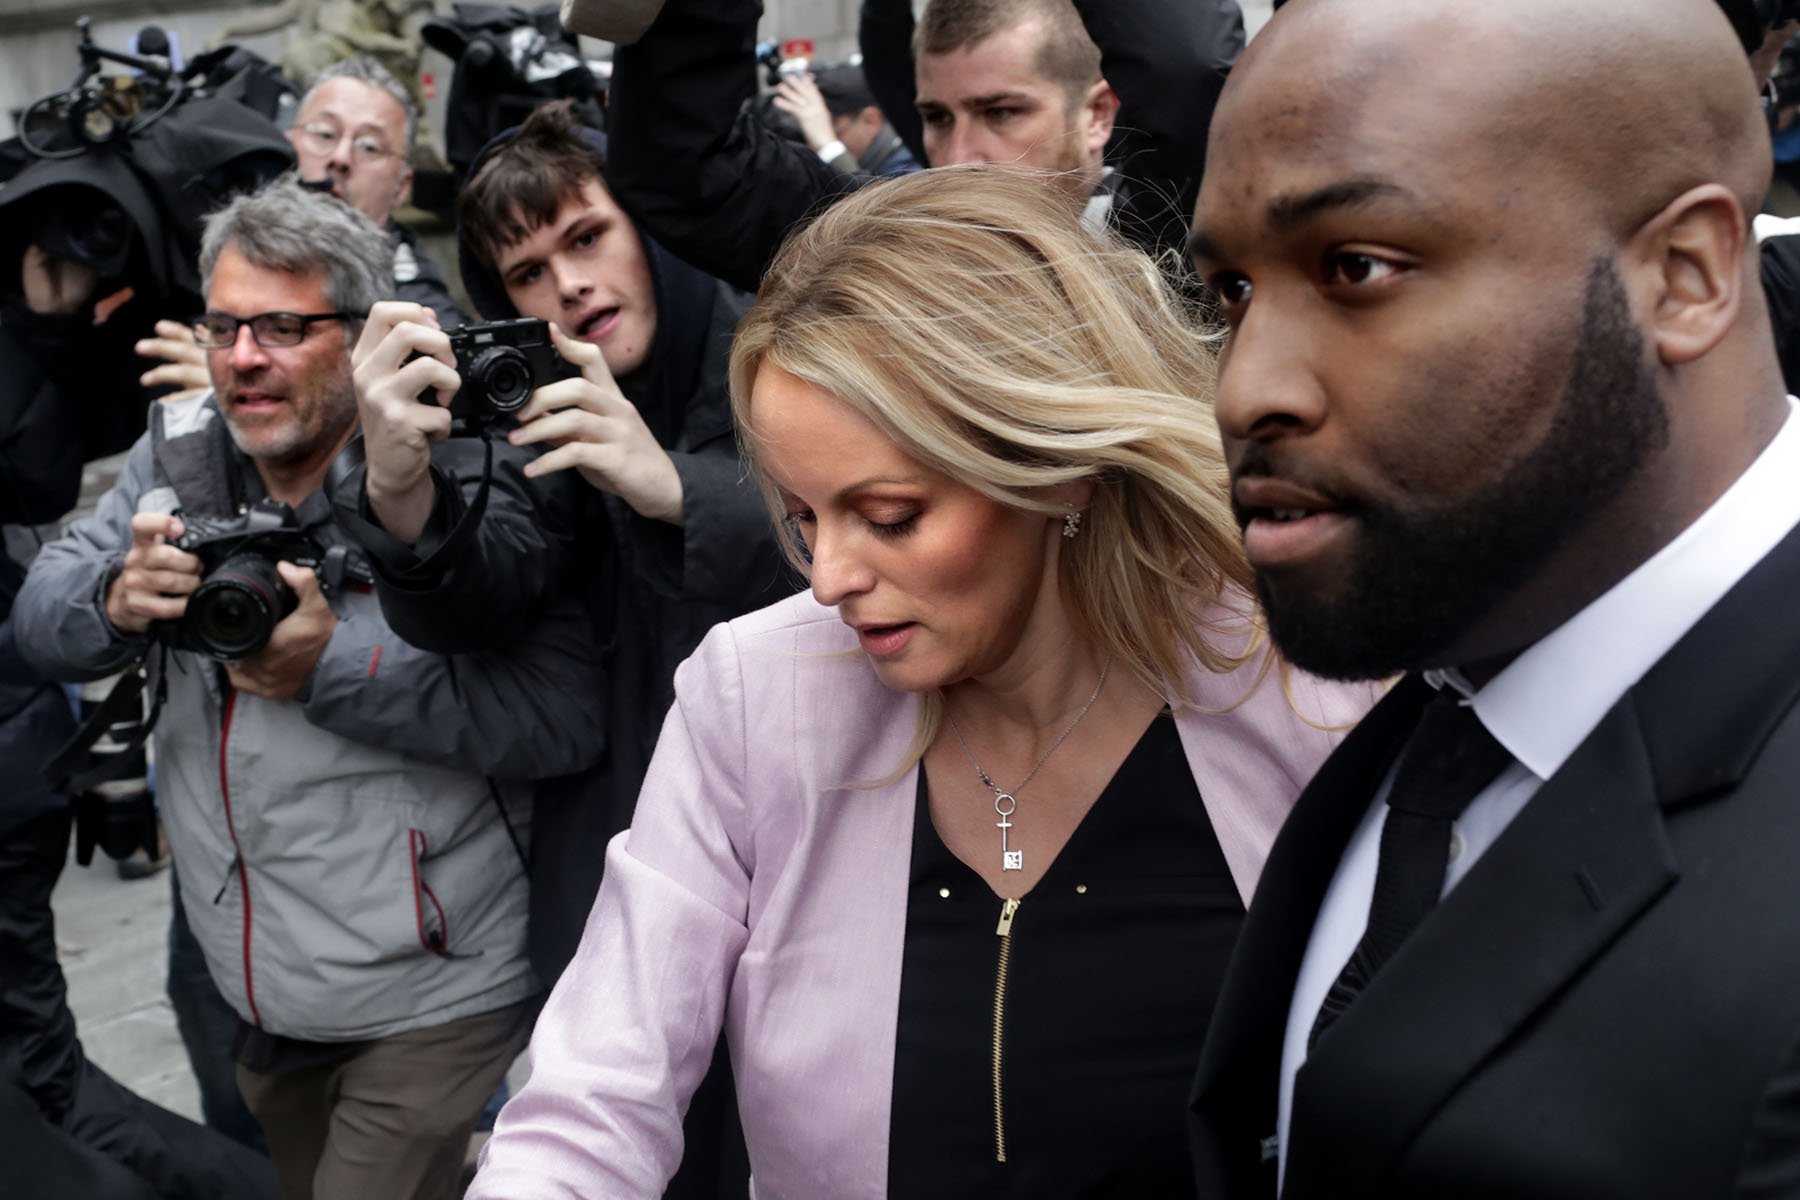 Photographers try to snap a shot of Stormy Daniels as a body guards tries to protect her as she arrives at the United States District Court Southern District of New York for a hearing.